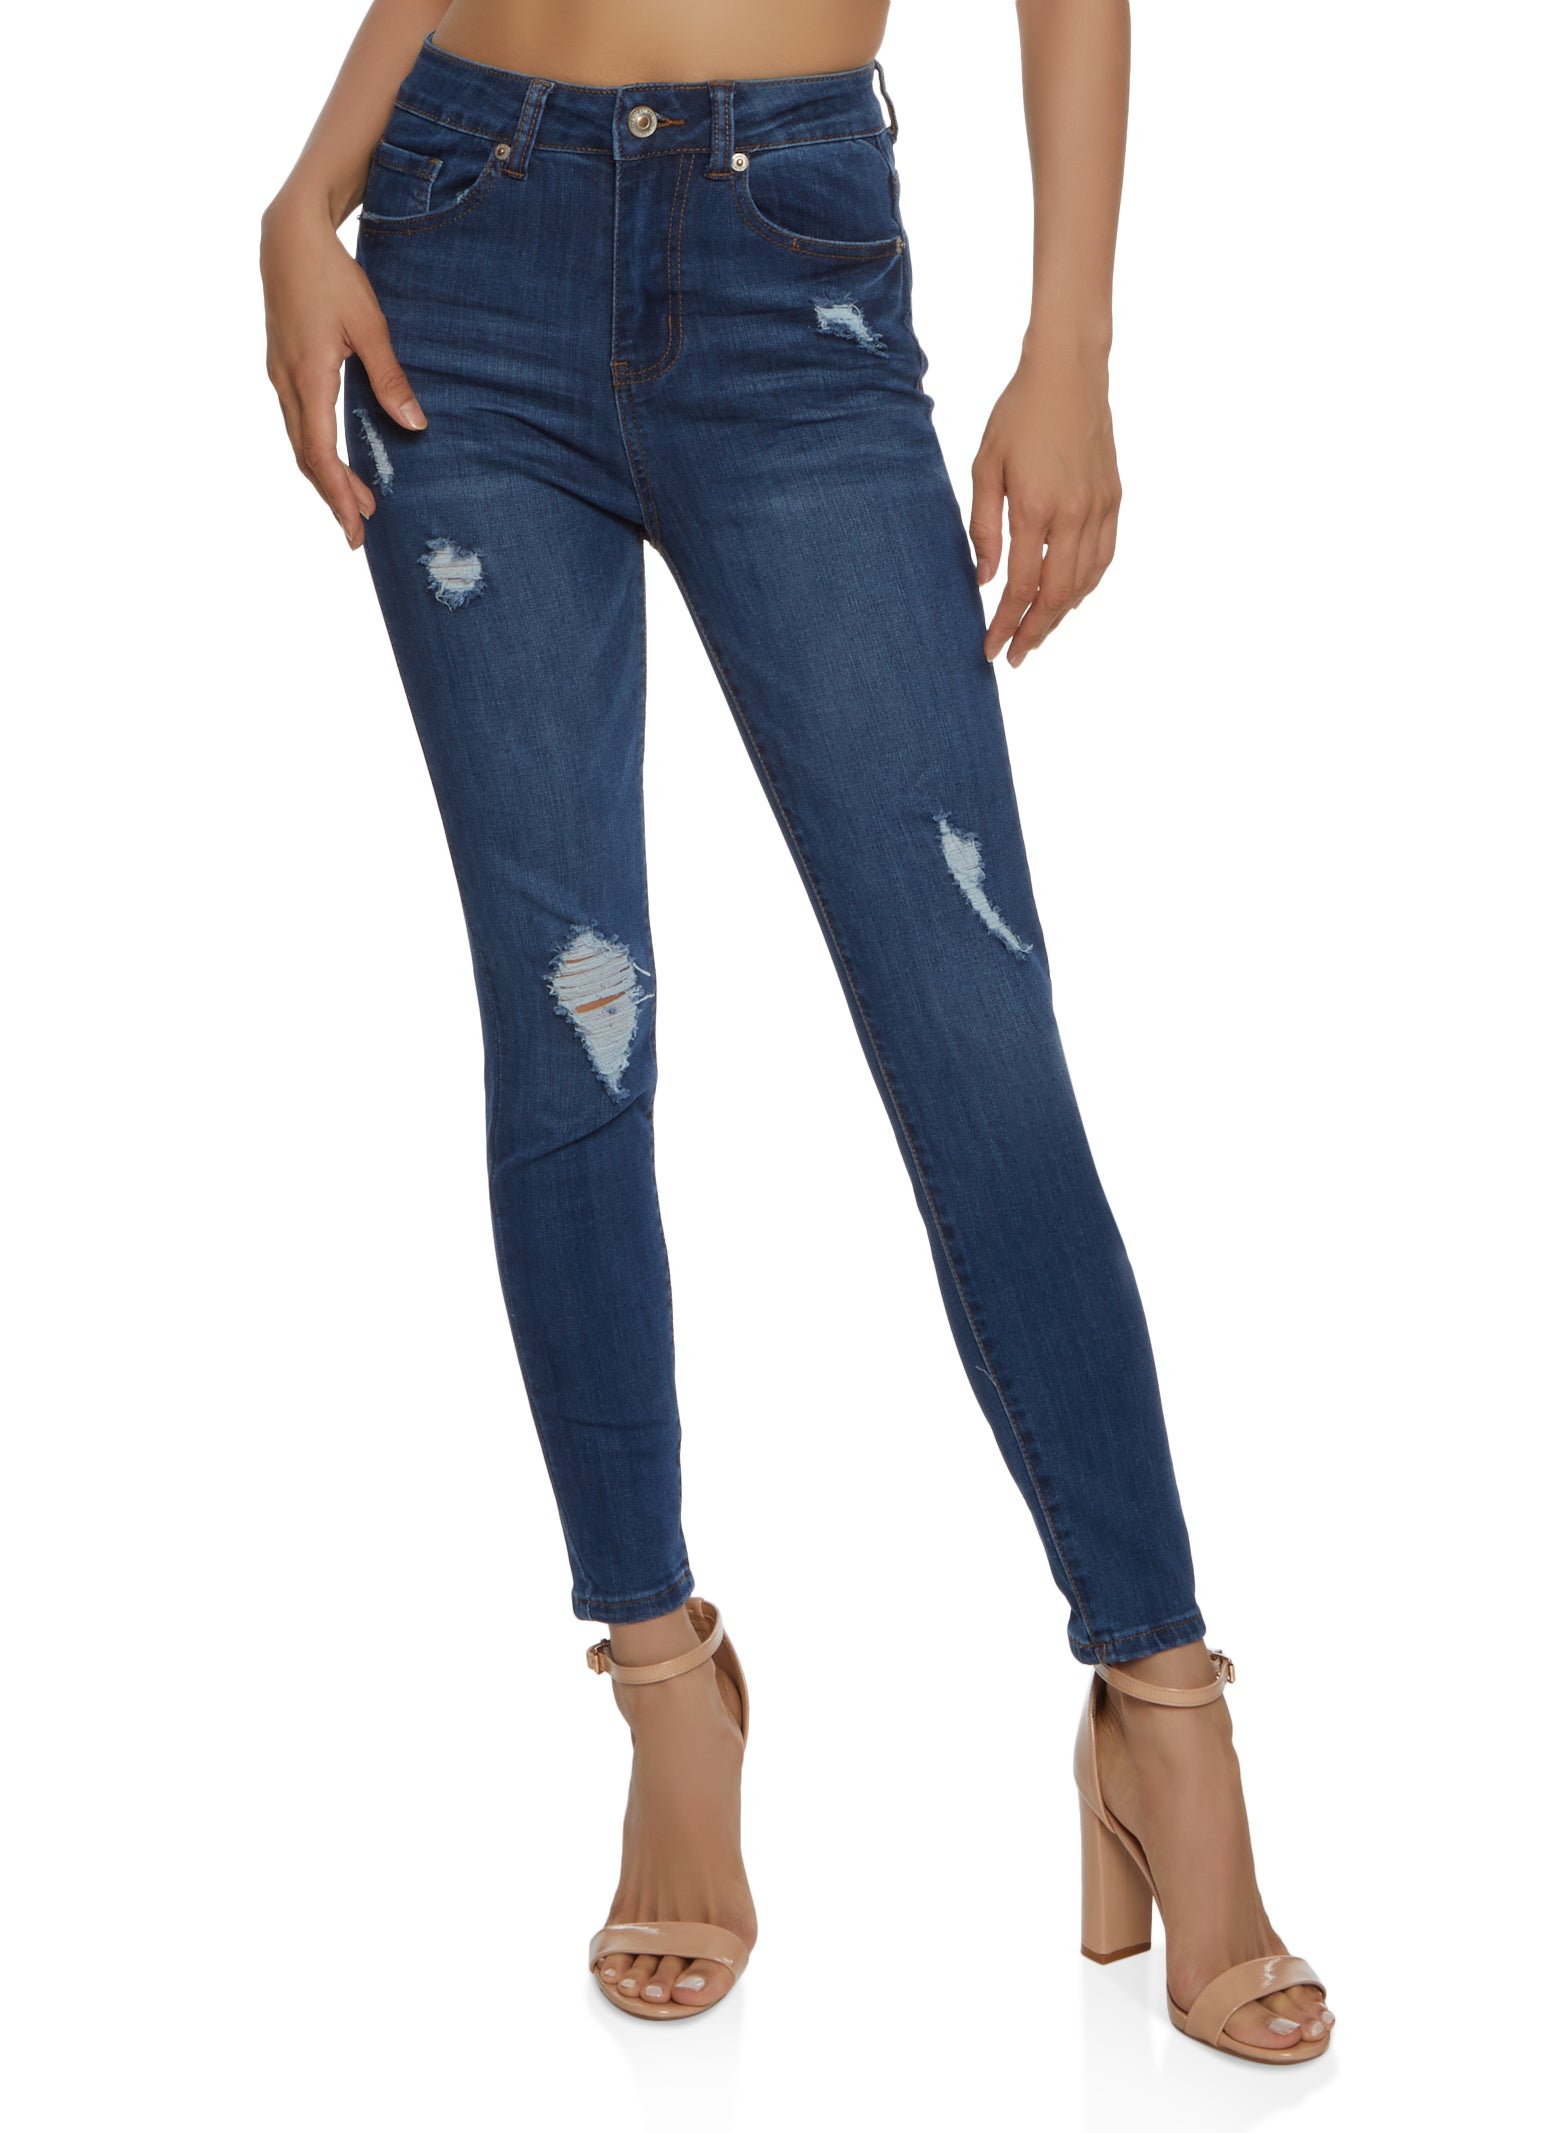 WAX Stretch Distressed High Waisted Jeans